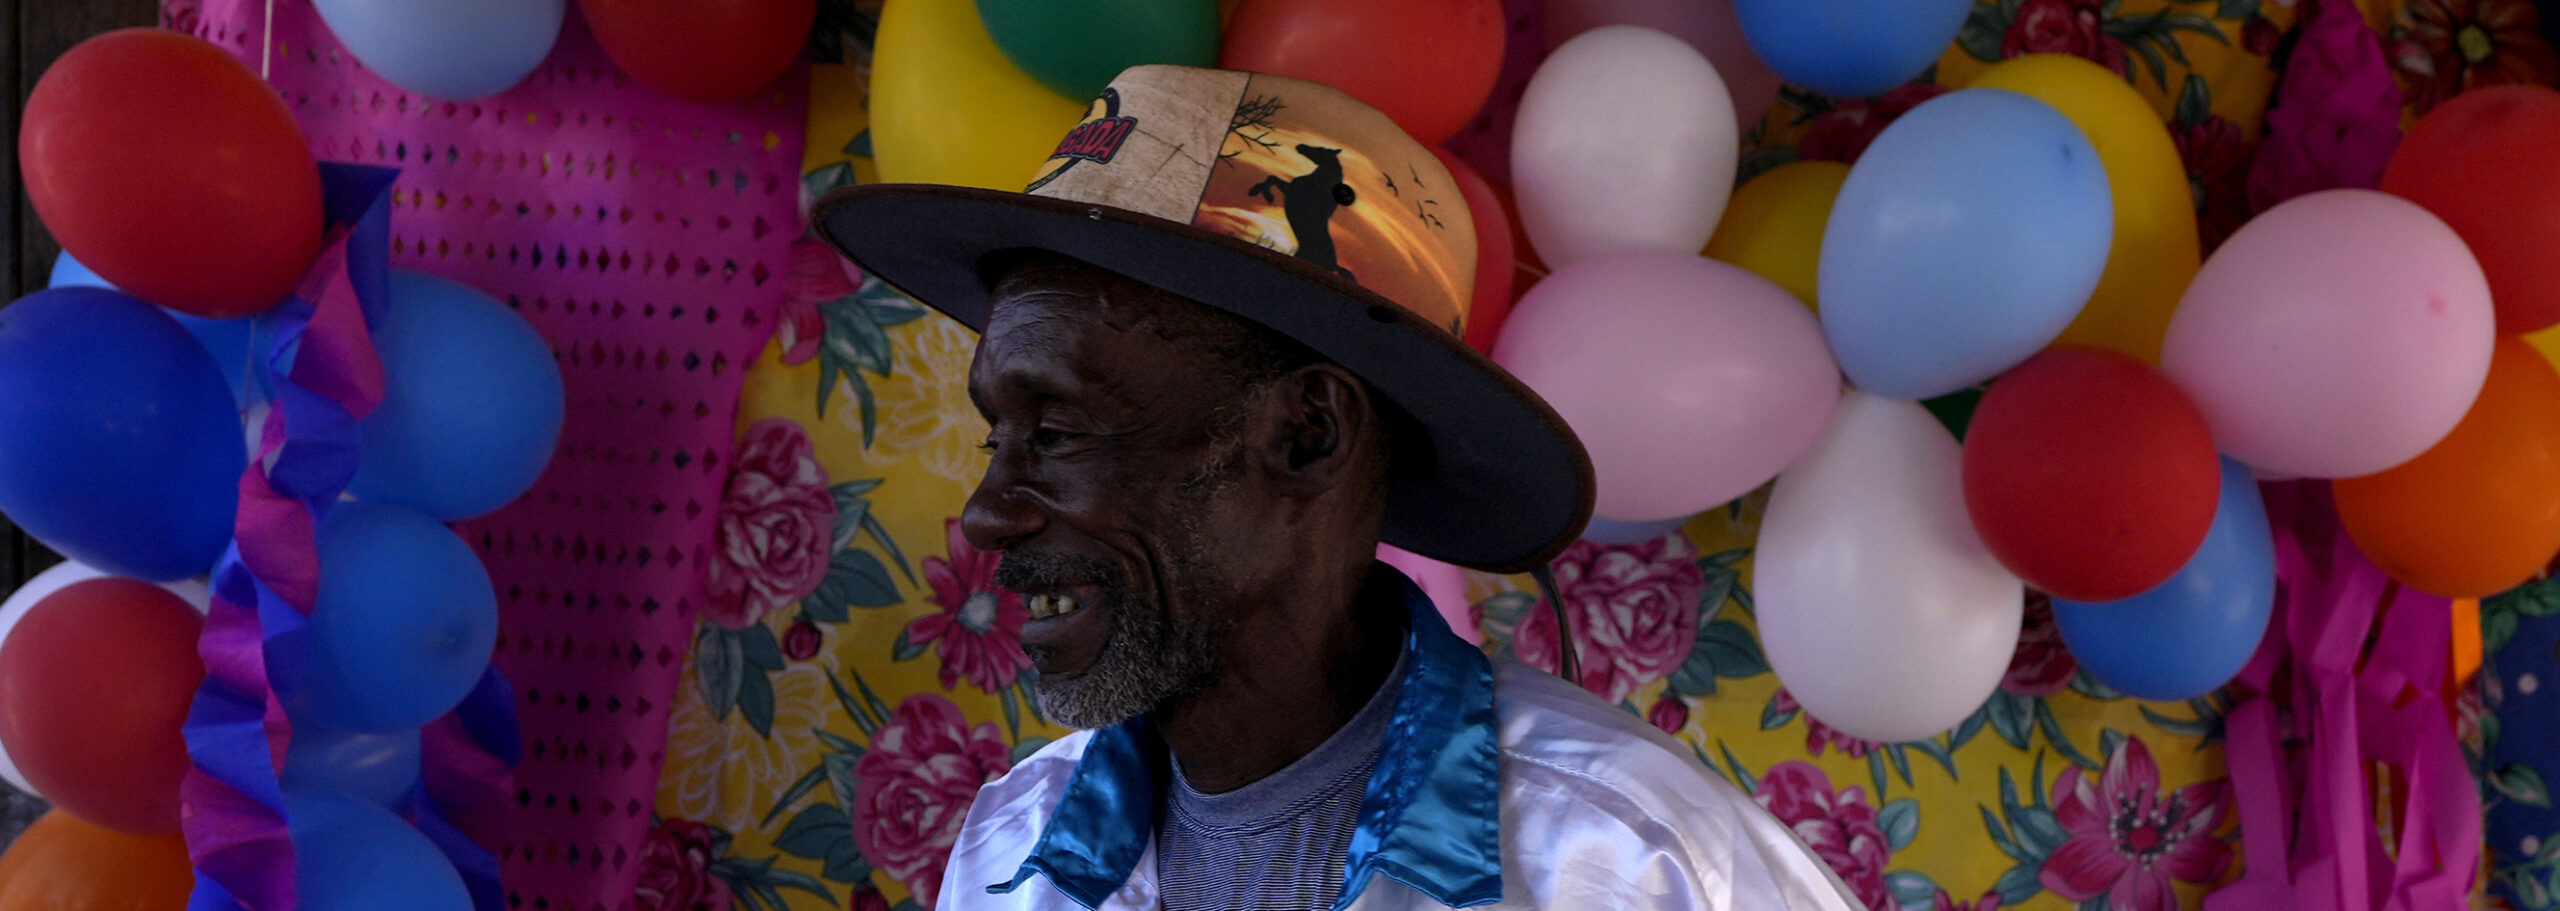 A man dressed as a servant in the Emperor's procession in the Kalunga quilombo, the descendants of runaway slaves, during the culmination of the week-long pilgrimage and celebration for the patron saint "Nossa Senhora da Abadia" or Our Lady of Abadia, in the rural area of Cavalcante in Goias state, Brazil, Monday, Aug. 15, 2022. Devotees celebrate Our Lady of Abadia at this time of the year with weddings, baptisms and by crowning distinguished community members, as they maintain cultural practices originating from Africa that mix with Catholic traditions. (AP Photo/Eraldo Peres) (AP Photo/Eraldo Peres)